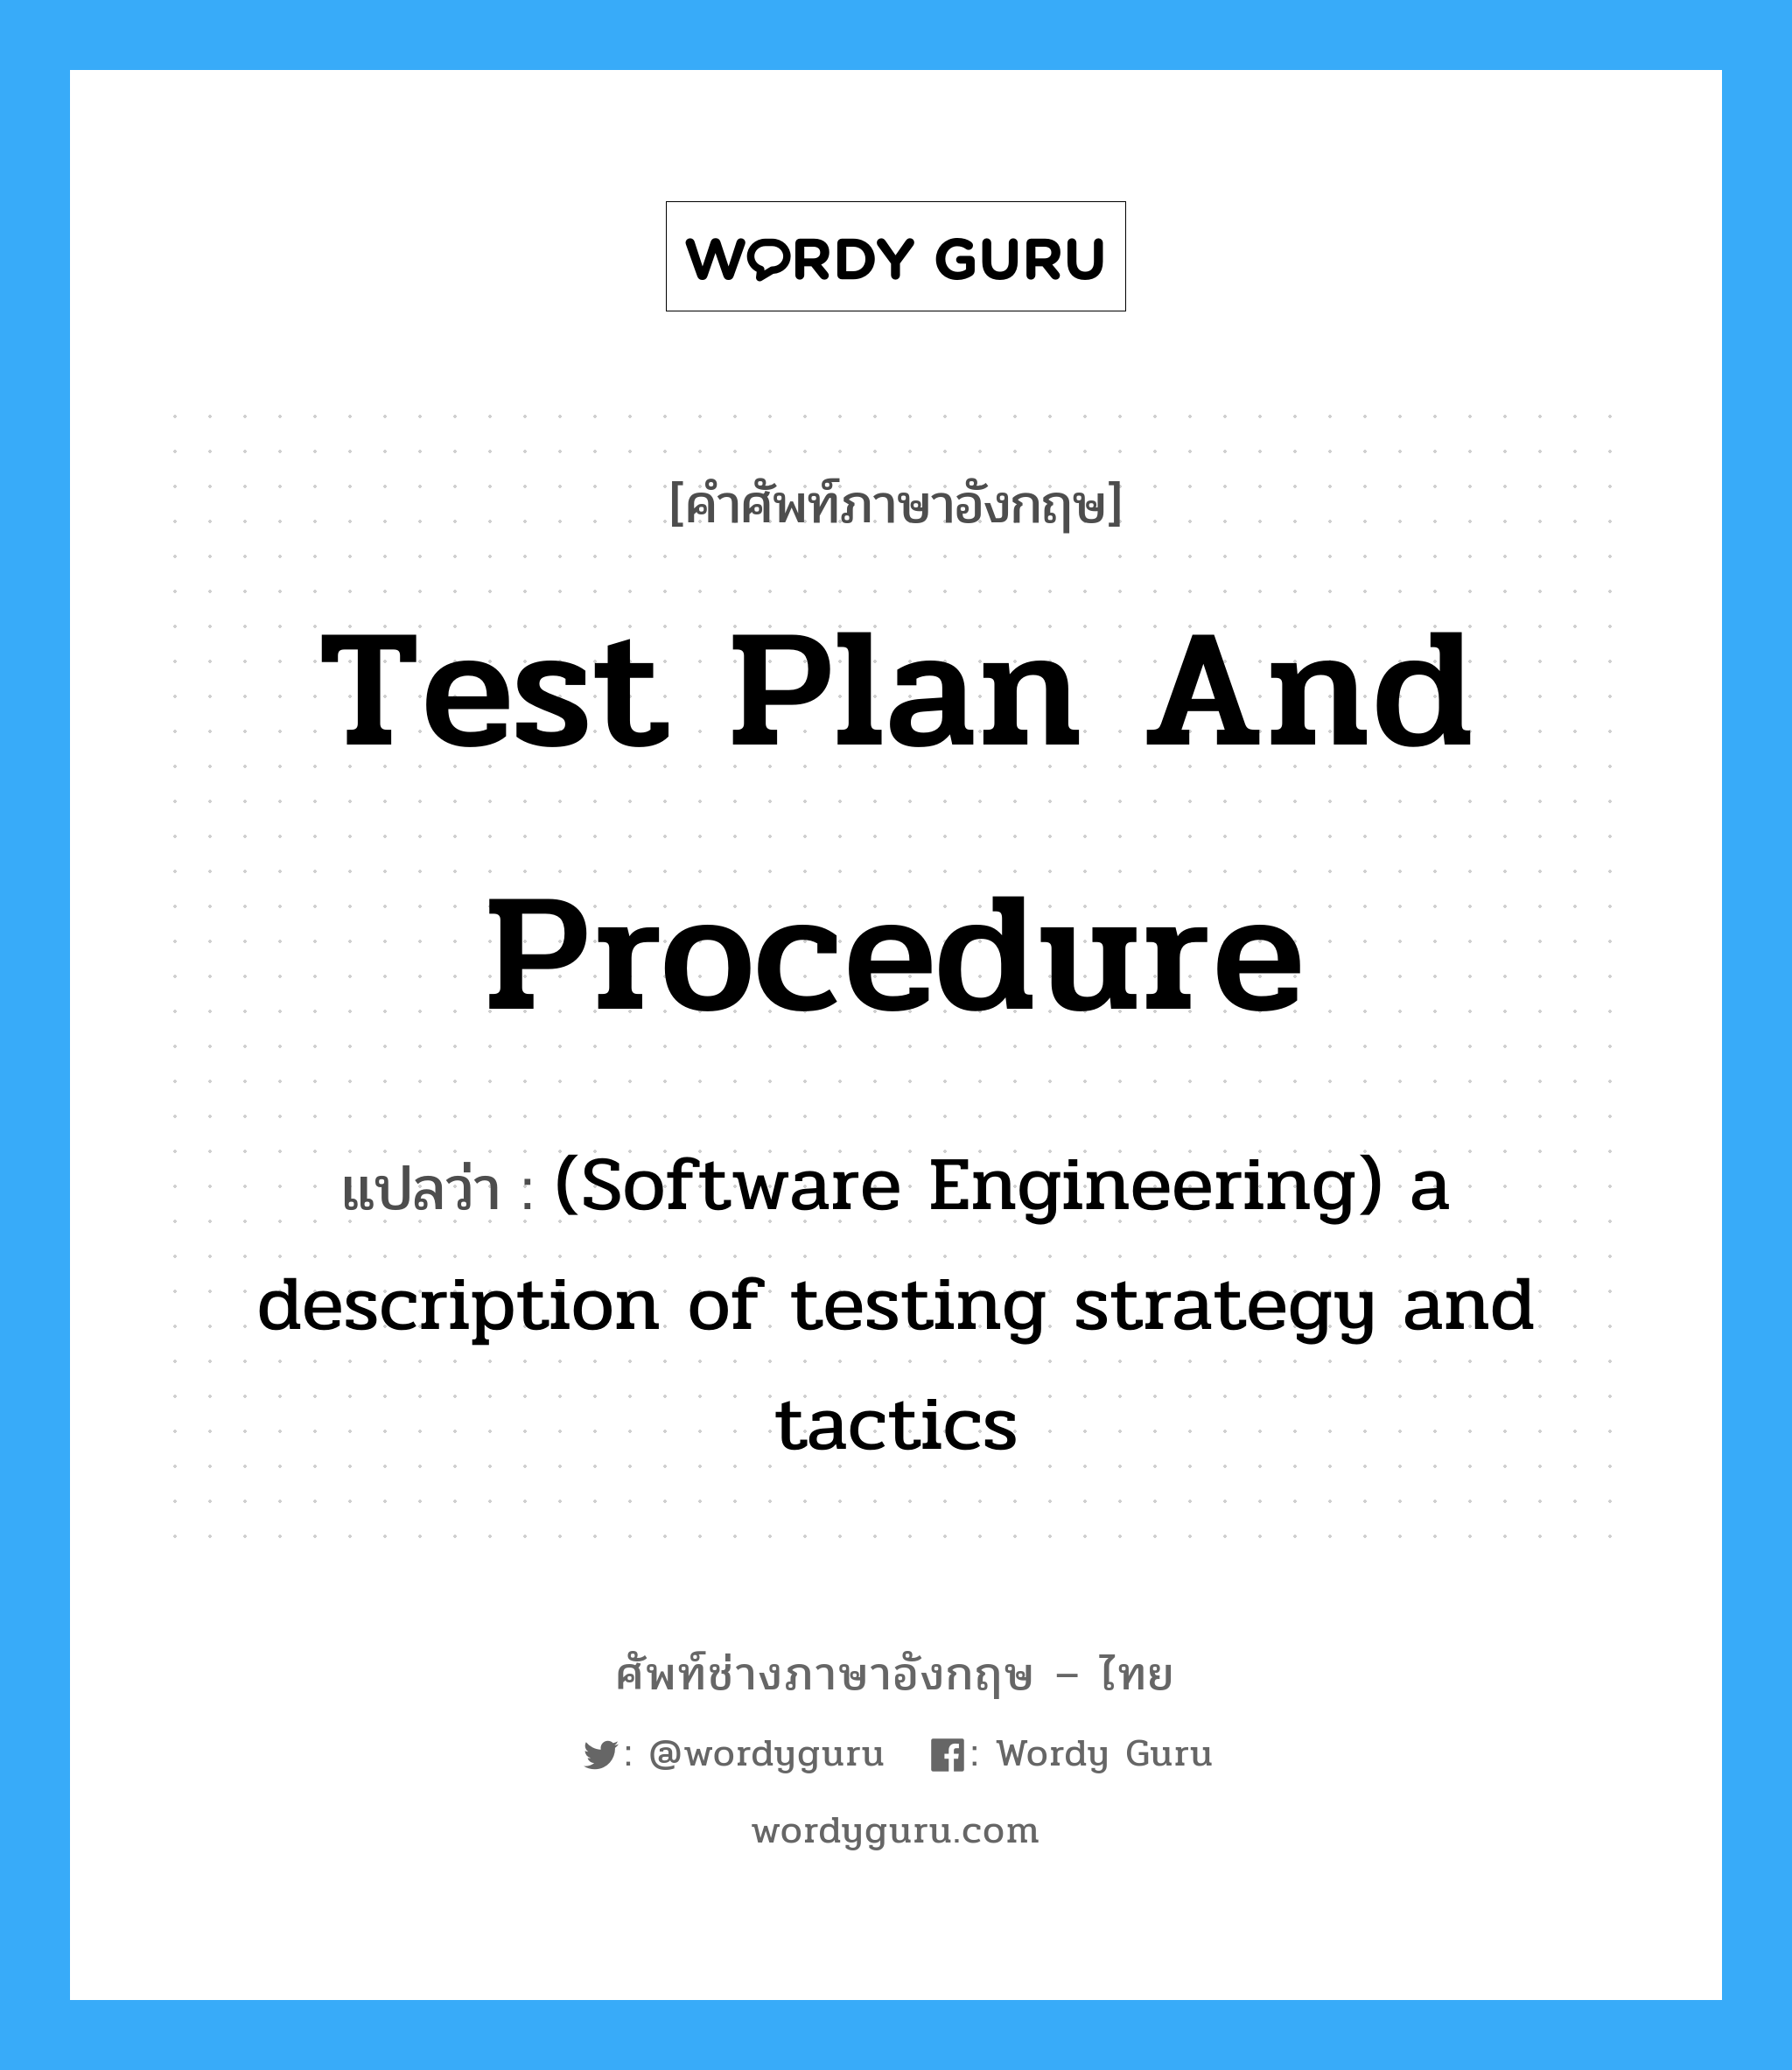 Test plan and procedure แปลว่า?, คำศัพท์ช่างภาษาอังกฤษ - ไทย Test plan and procedure คำศัพท์ภาษาอังกฤษ Test plan and procedure แปลว่า (Software Engineering) a description of testing strategy and tactics